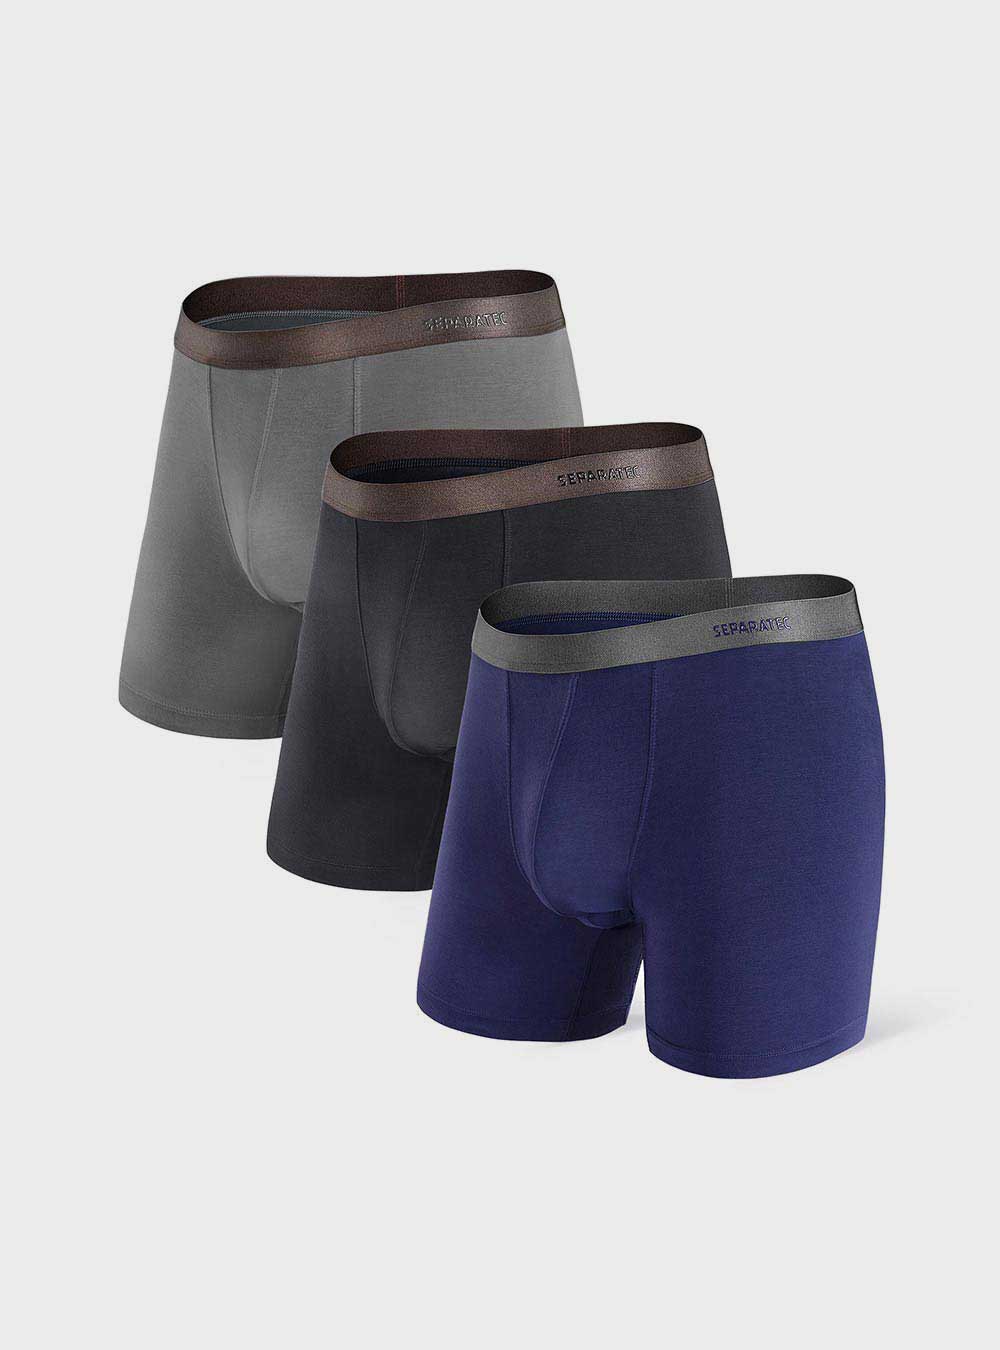 Stylish Classic Bamboo Rayon Dual Pouch Boxer Briefs